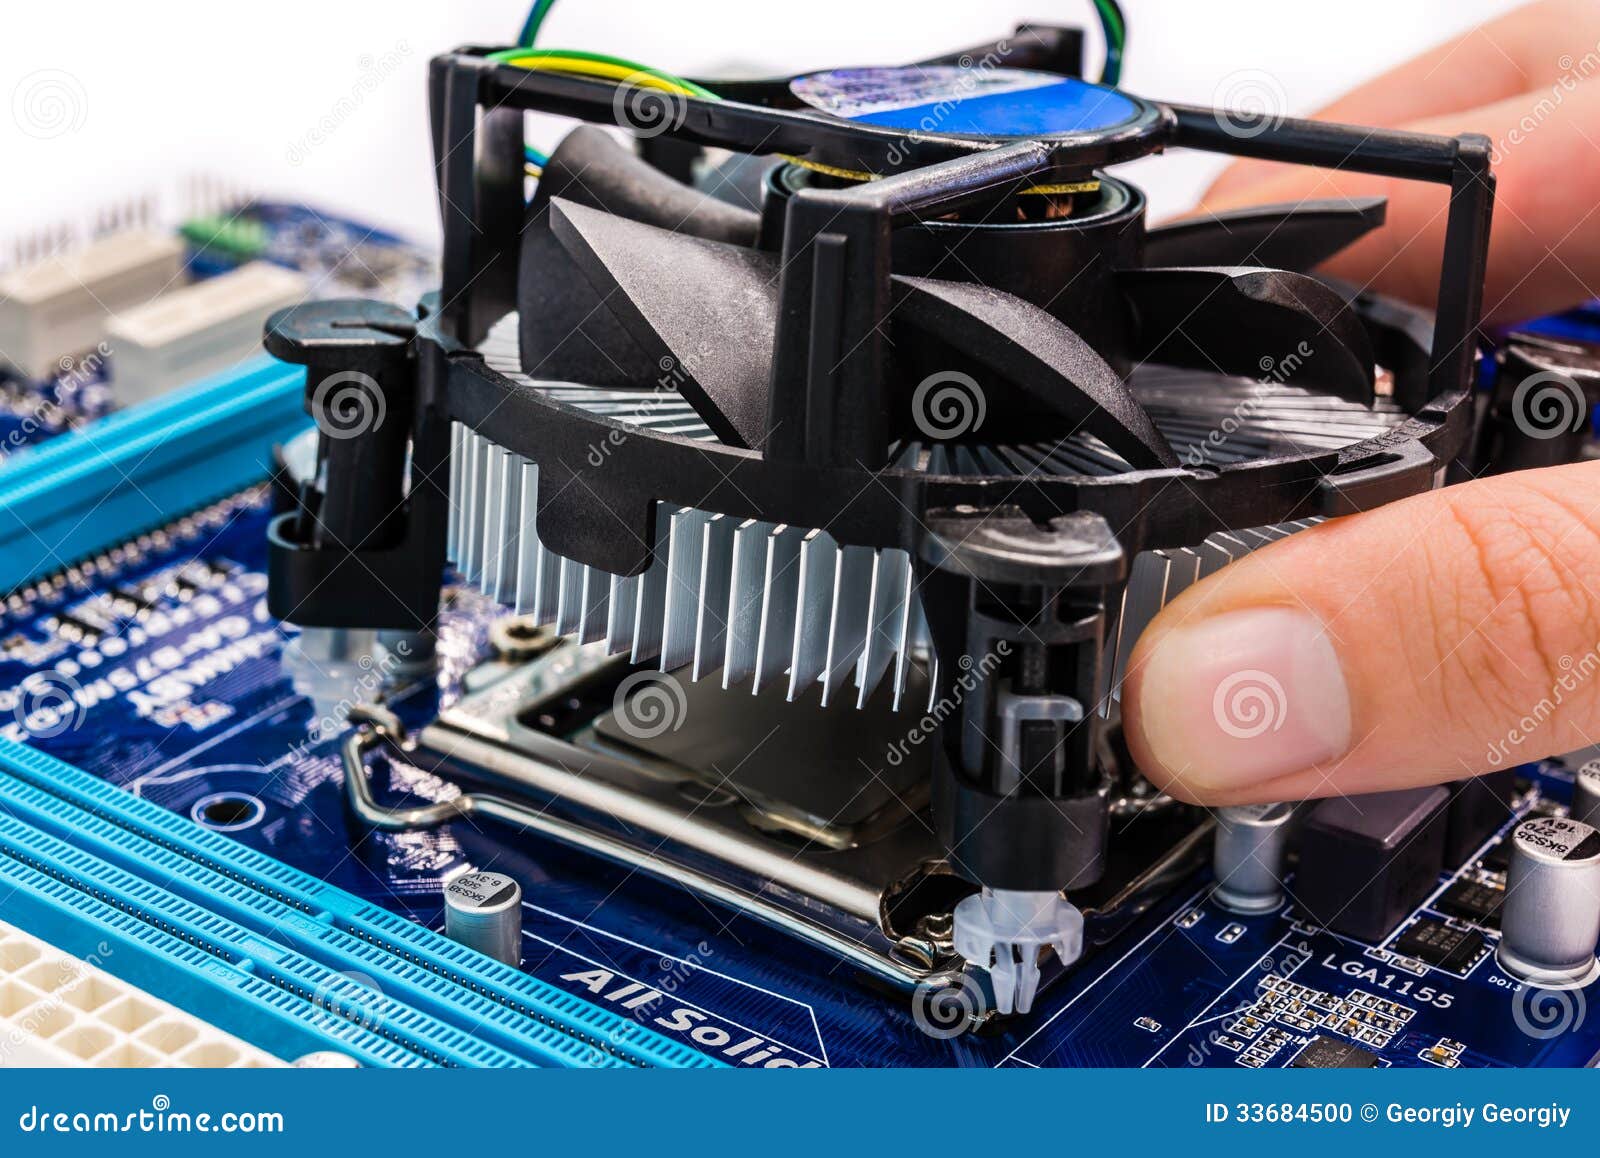 Installing CPU cooler stock photo. Image of cooling, detail - 33684500